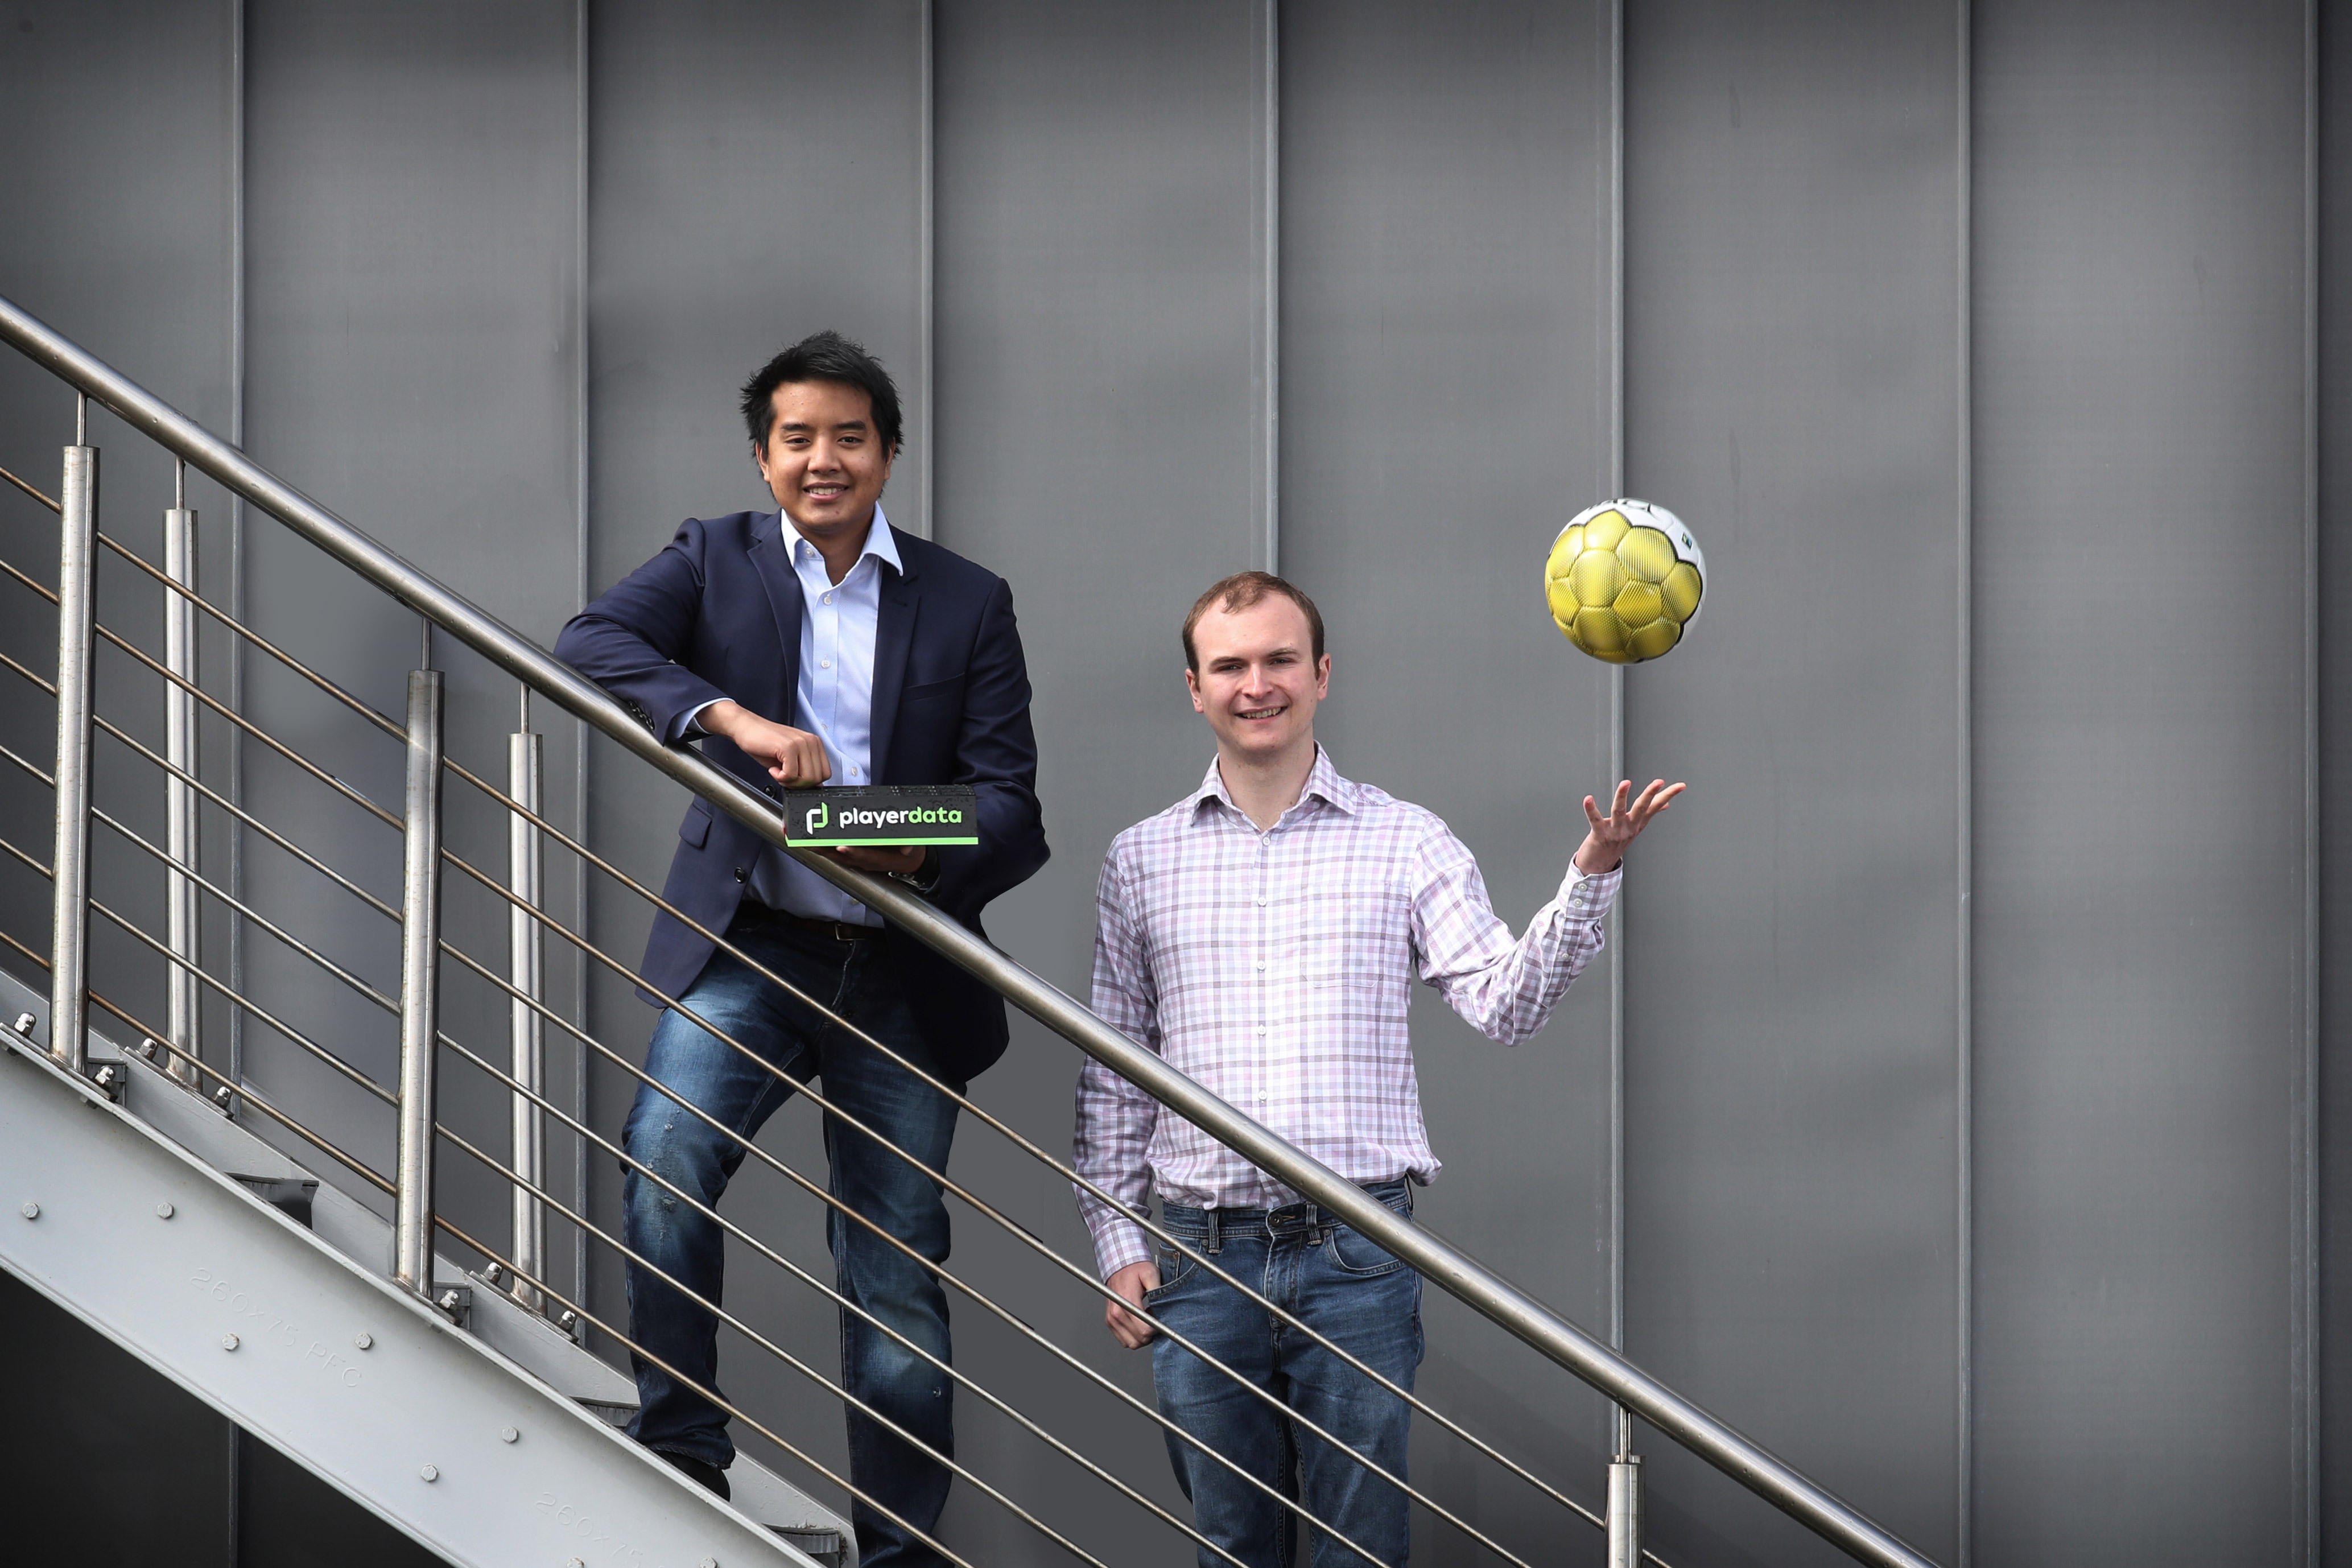 PlayerData raises $2.3m in series A investment round led by Hiro Capital